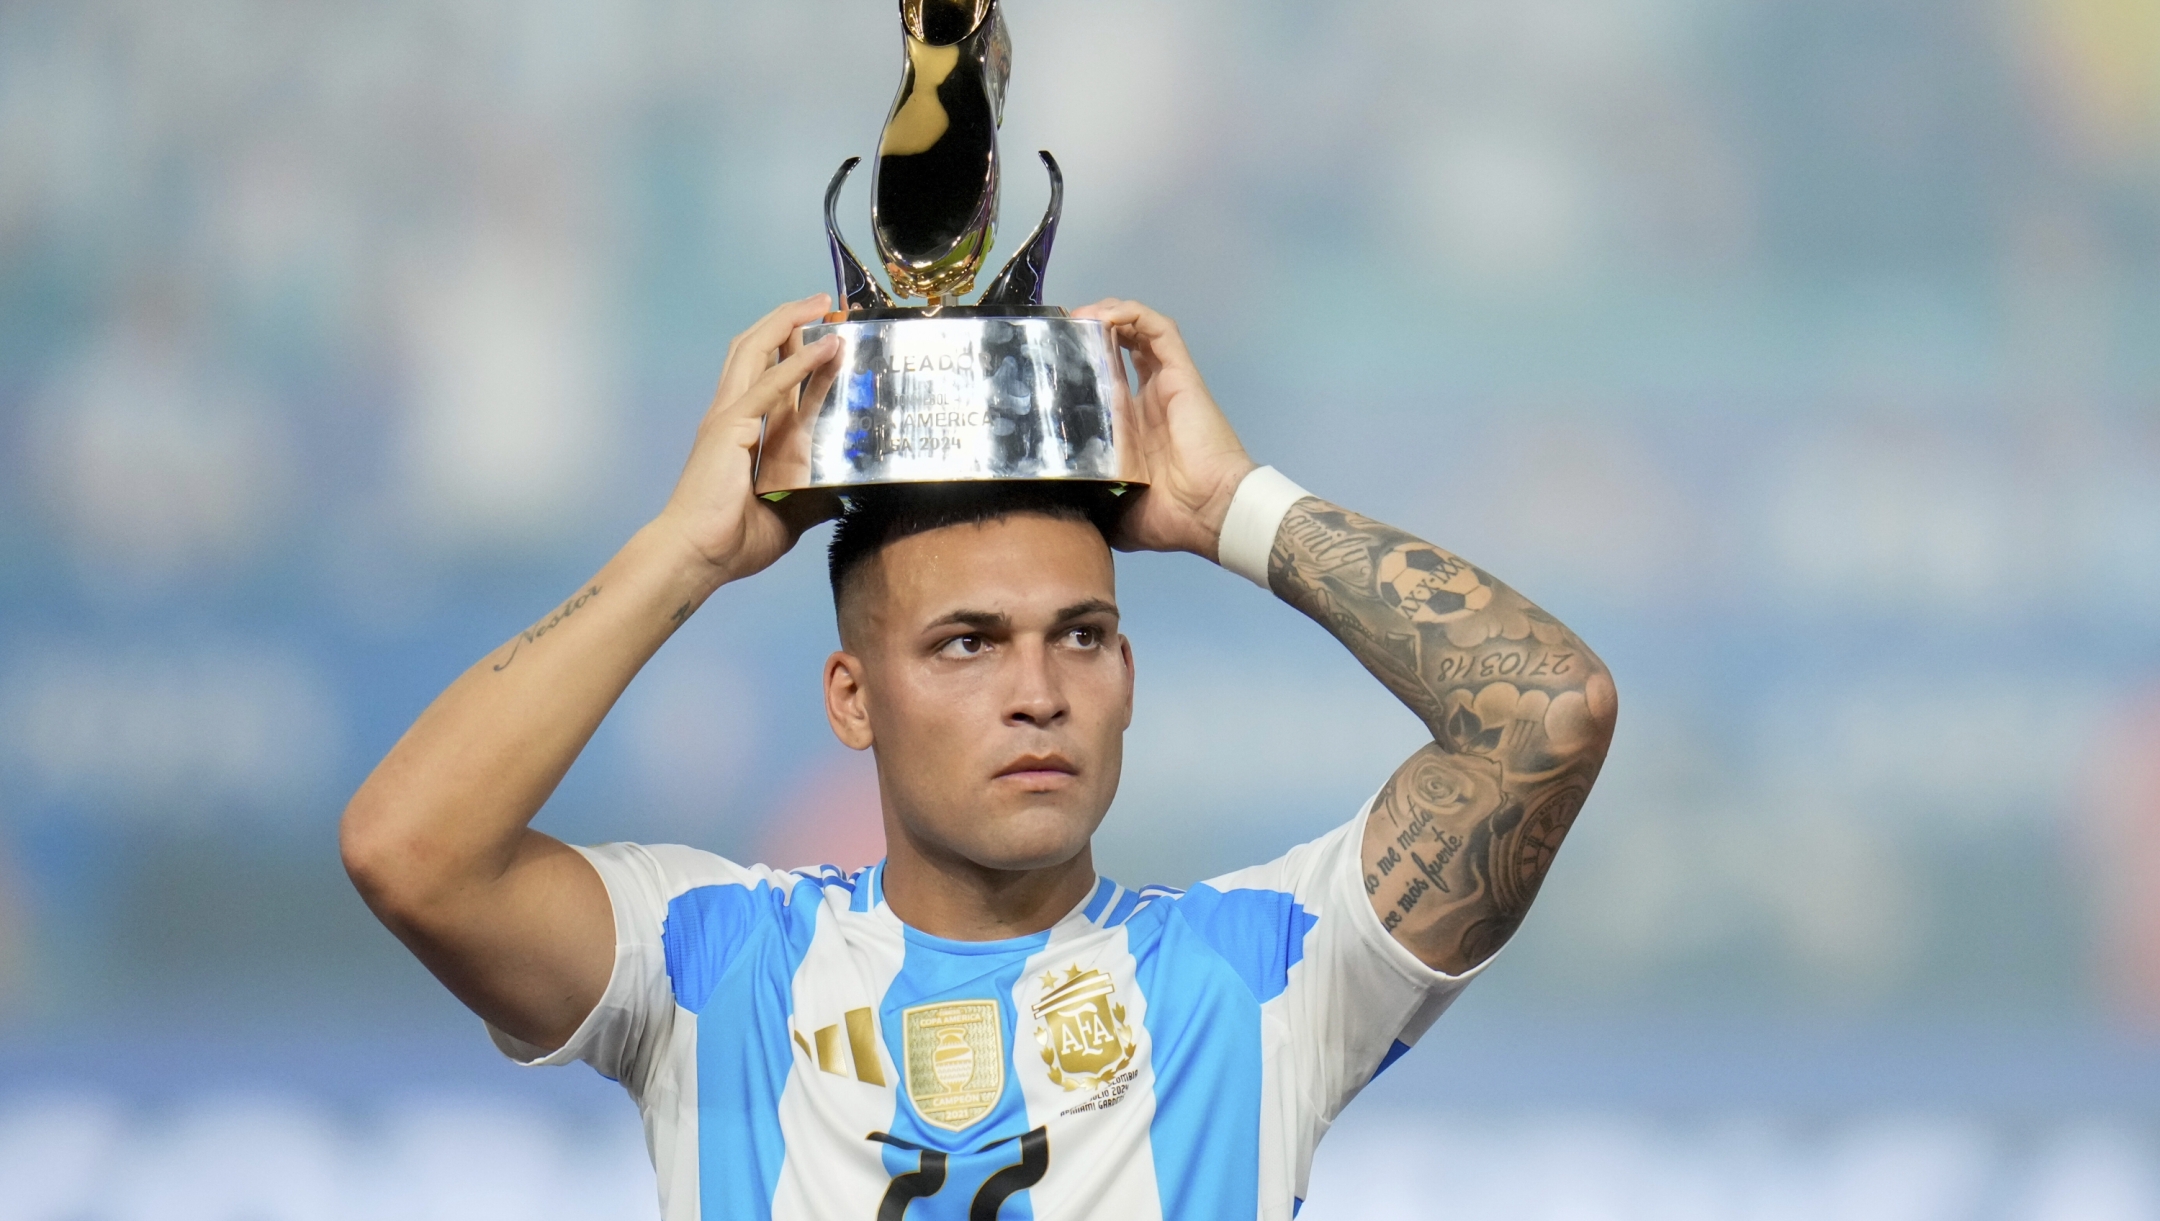 Argentina's Lautaro Martínez celebrates with the Golden Boot trophy after defeating Colombia in the Copa America final soccer match in Miami Gardens, Fla., Monday, July 15, 2024. (AP Photo/Julio Cortez)